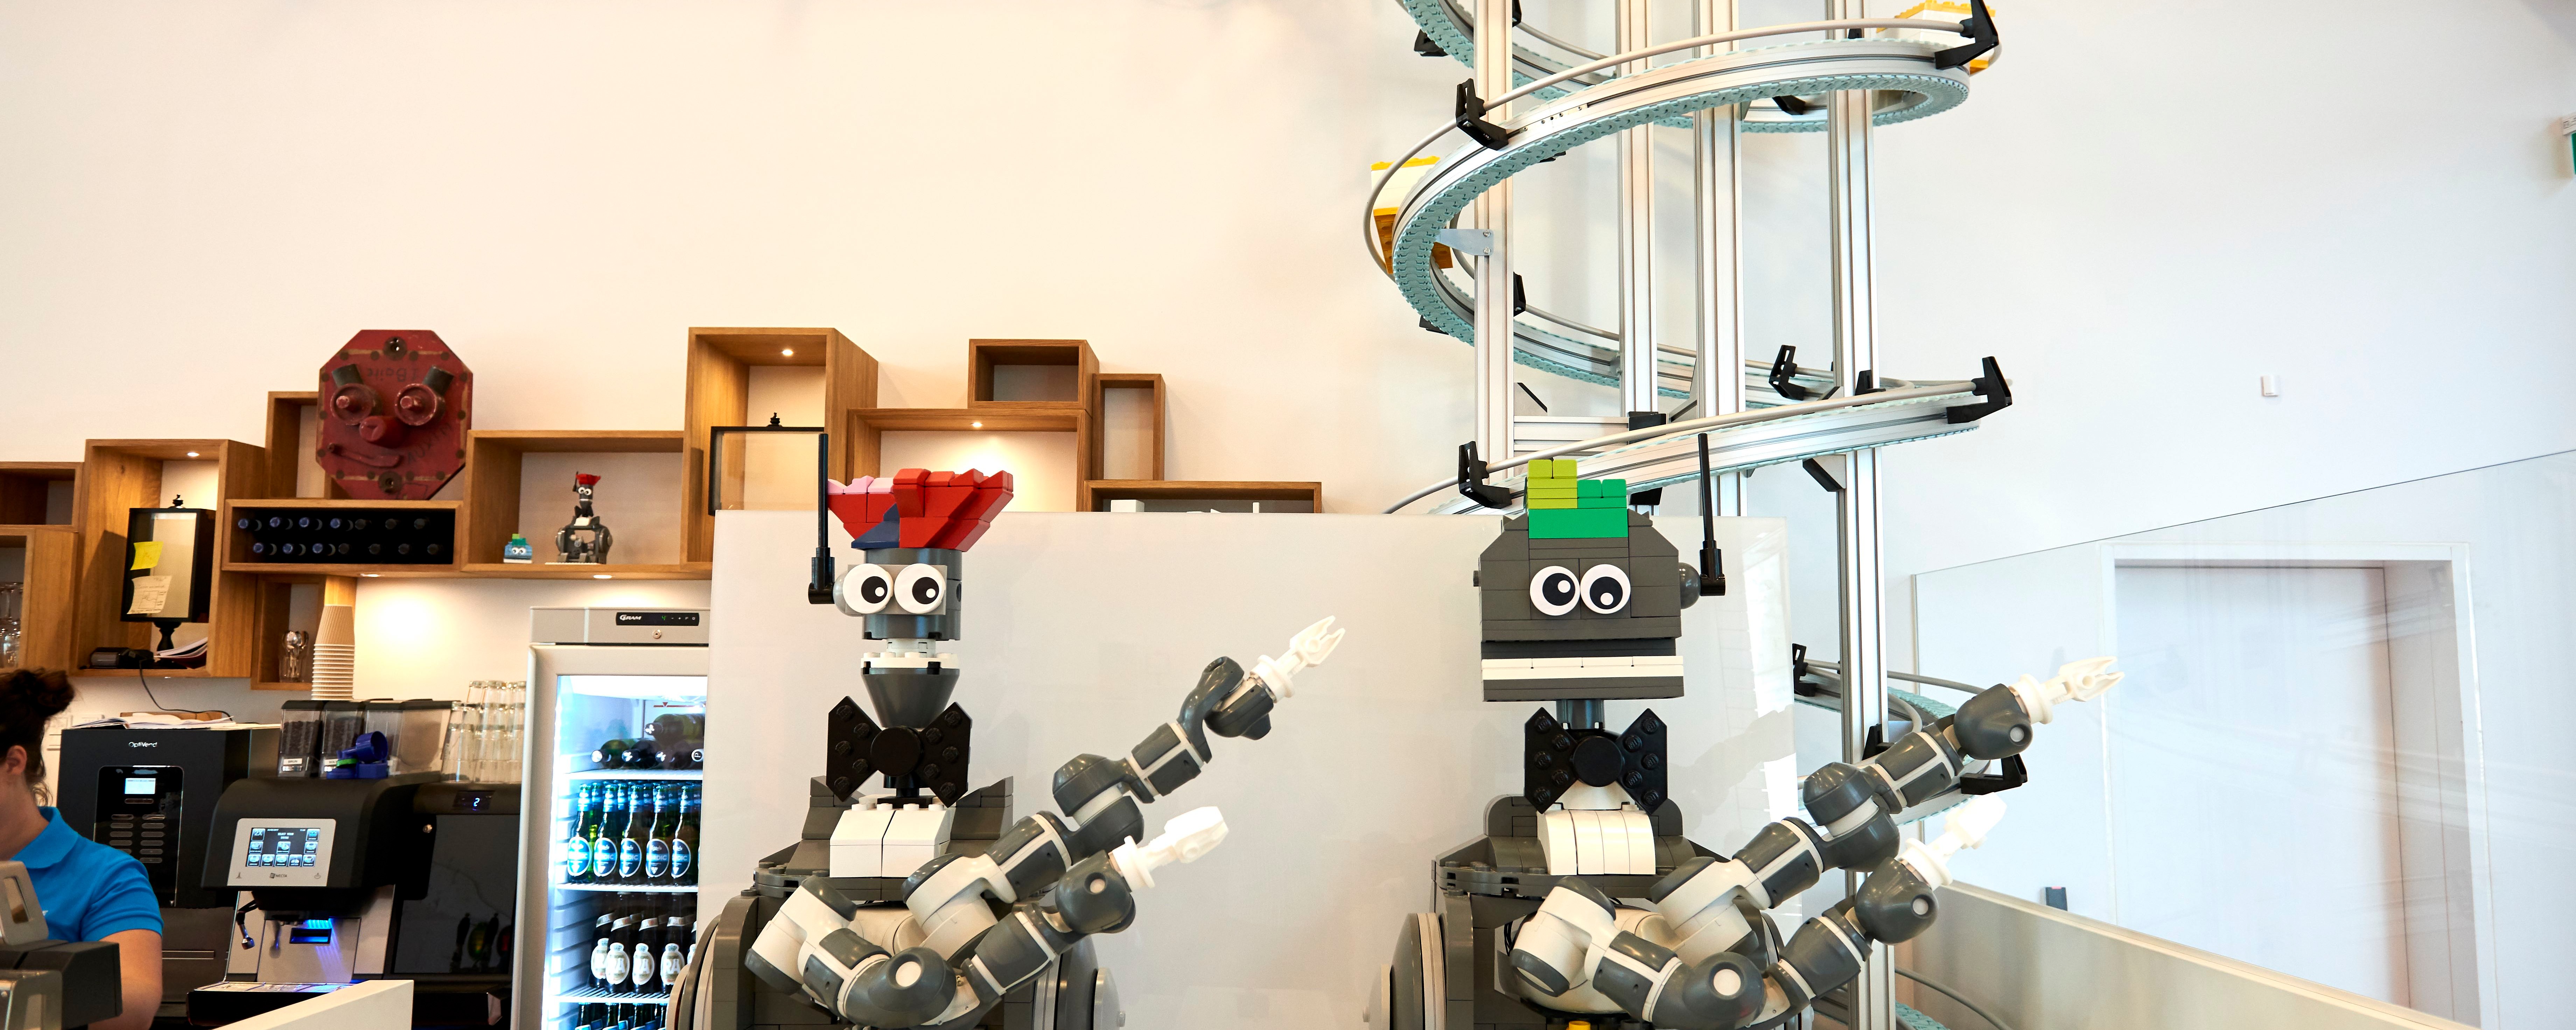 sennep Lege med ideologi I Tried to Hack the Robot Chef at Lego's New Restaurant